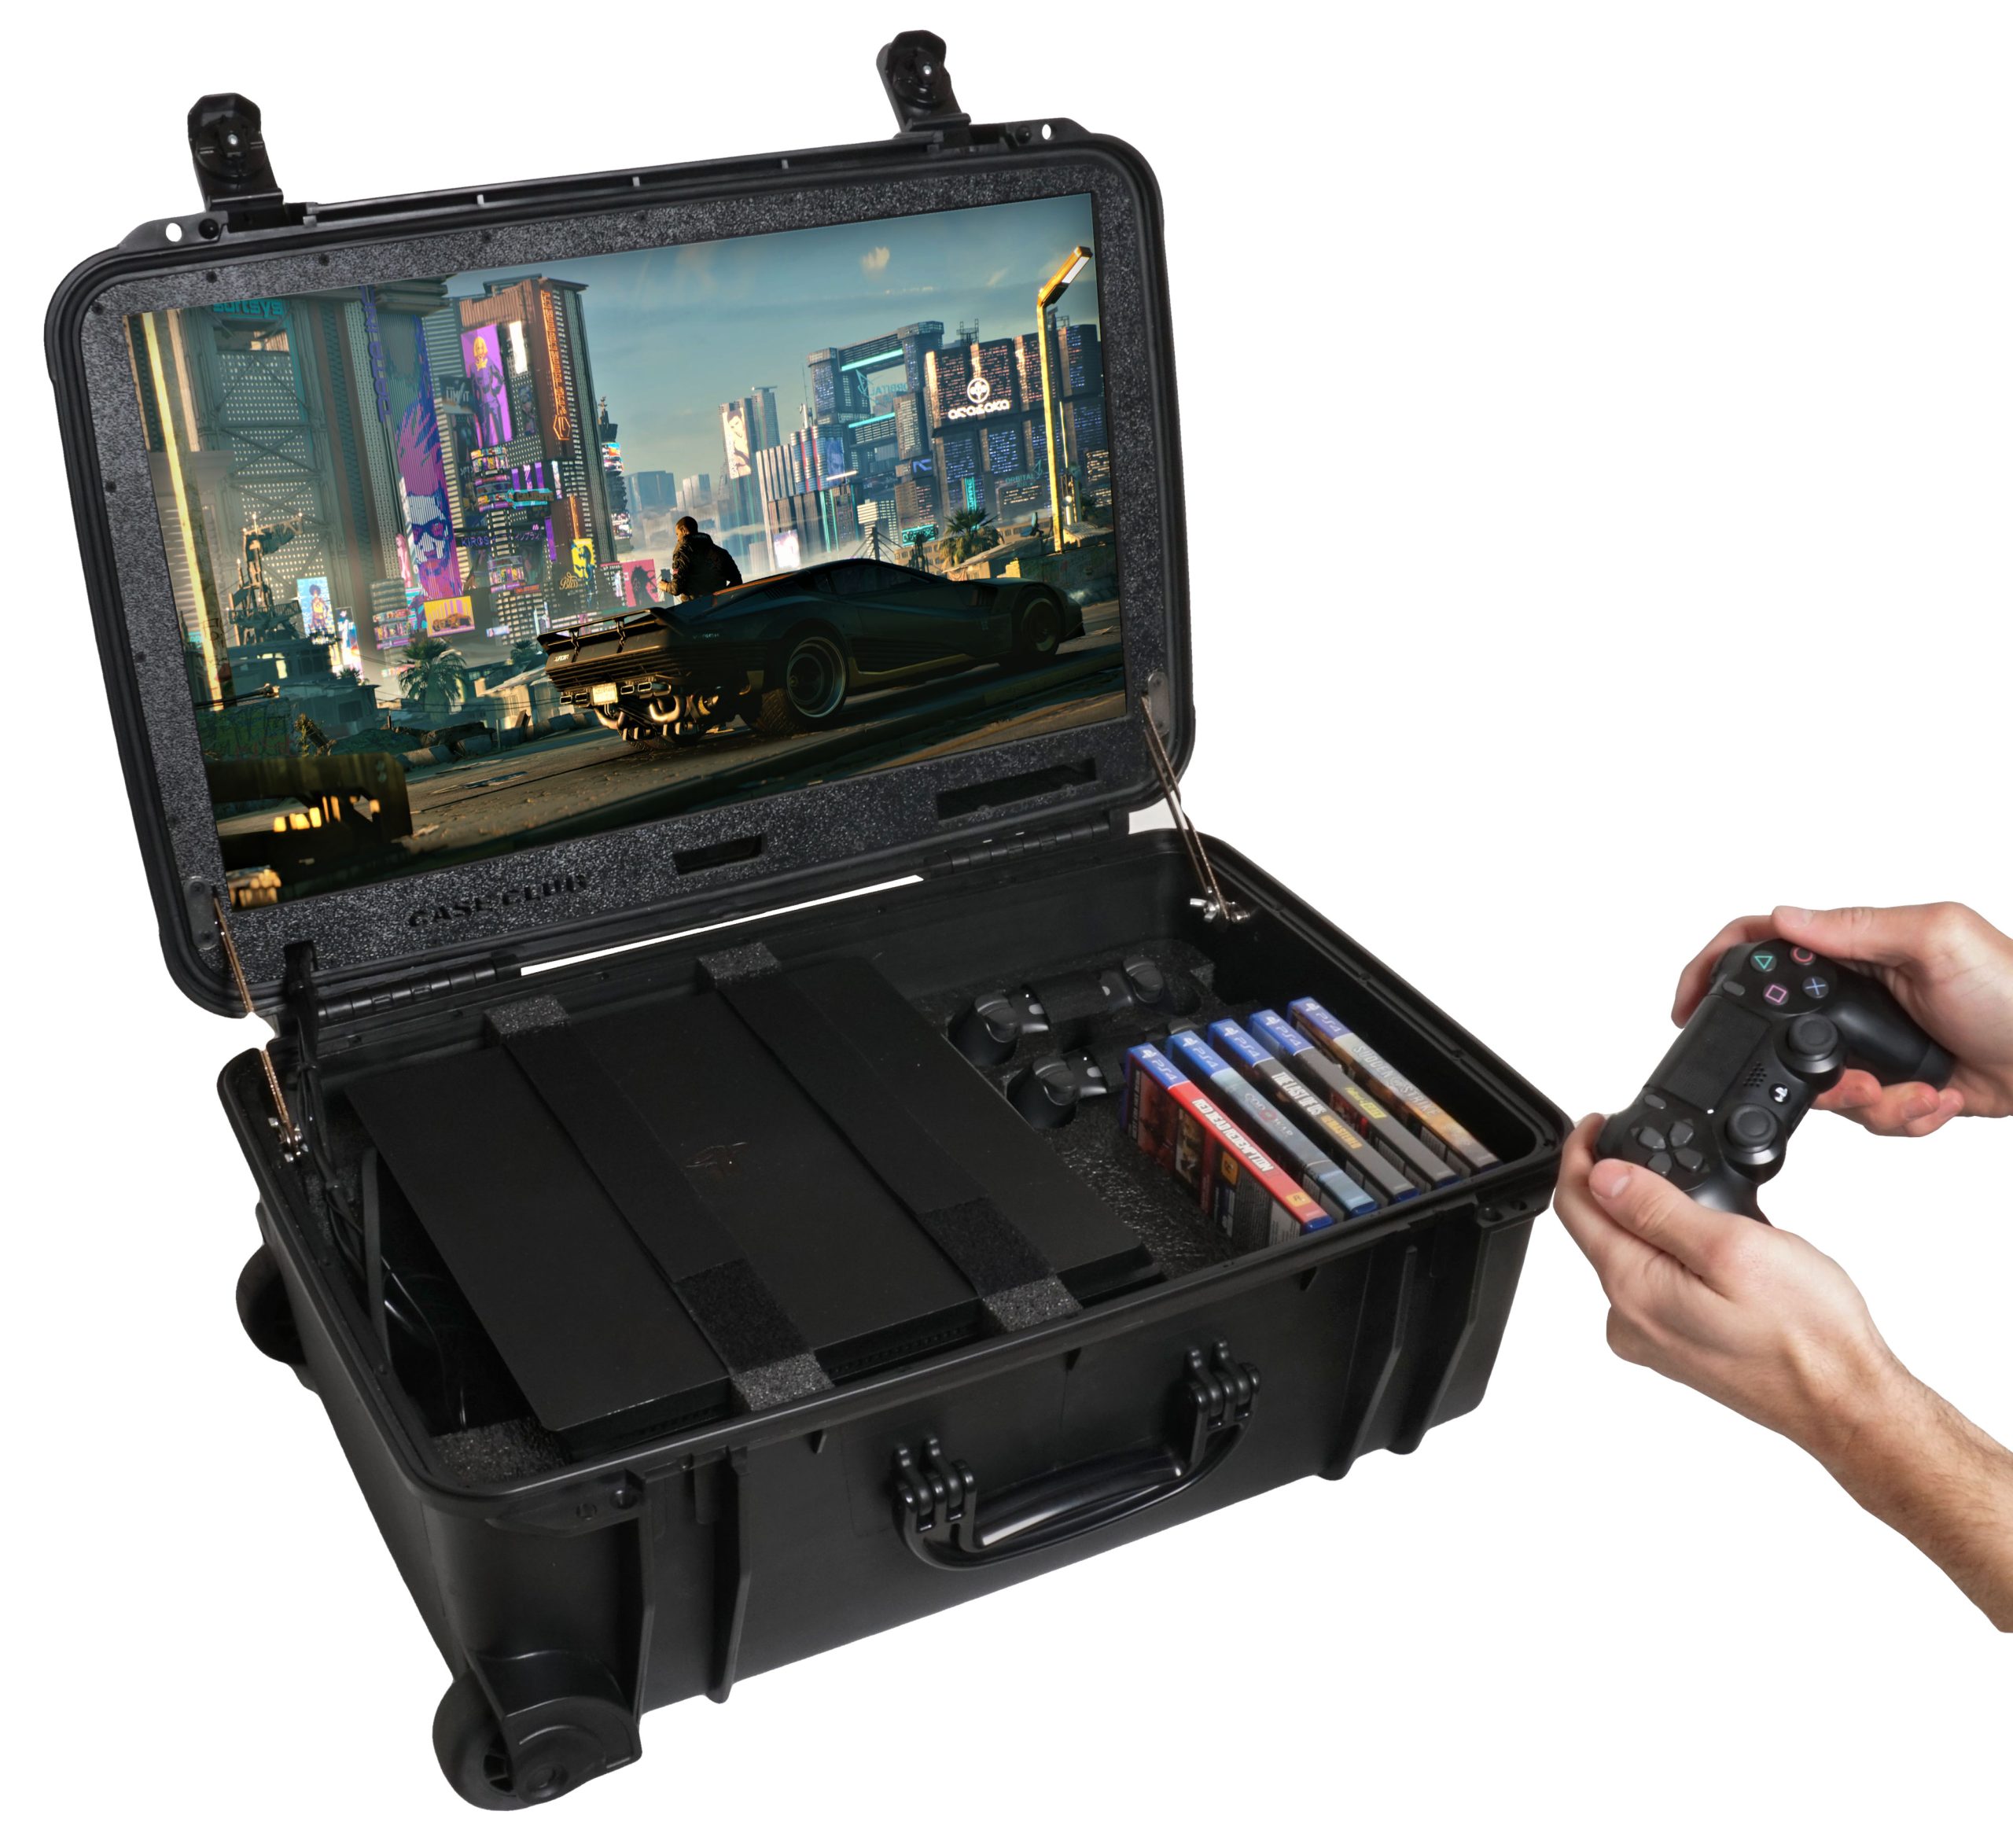 PlayStation 4 / PS4 Slim / PS4 Pro Portable Gaming Station with Built-in Monitor and Speakers Case Club